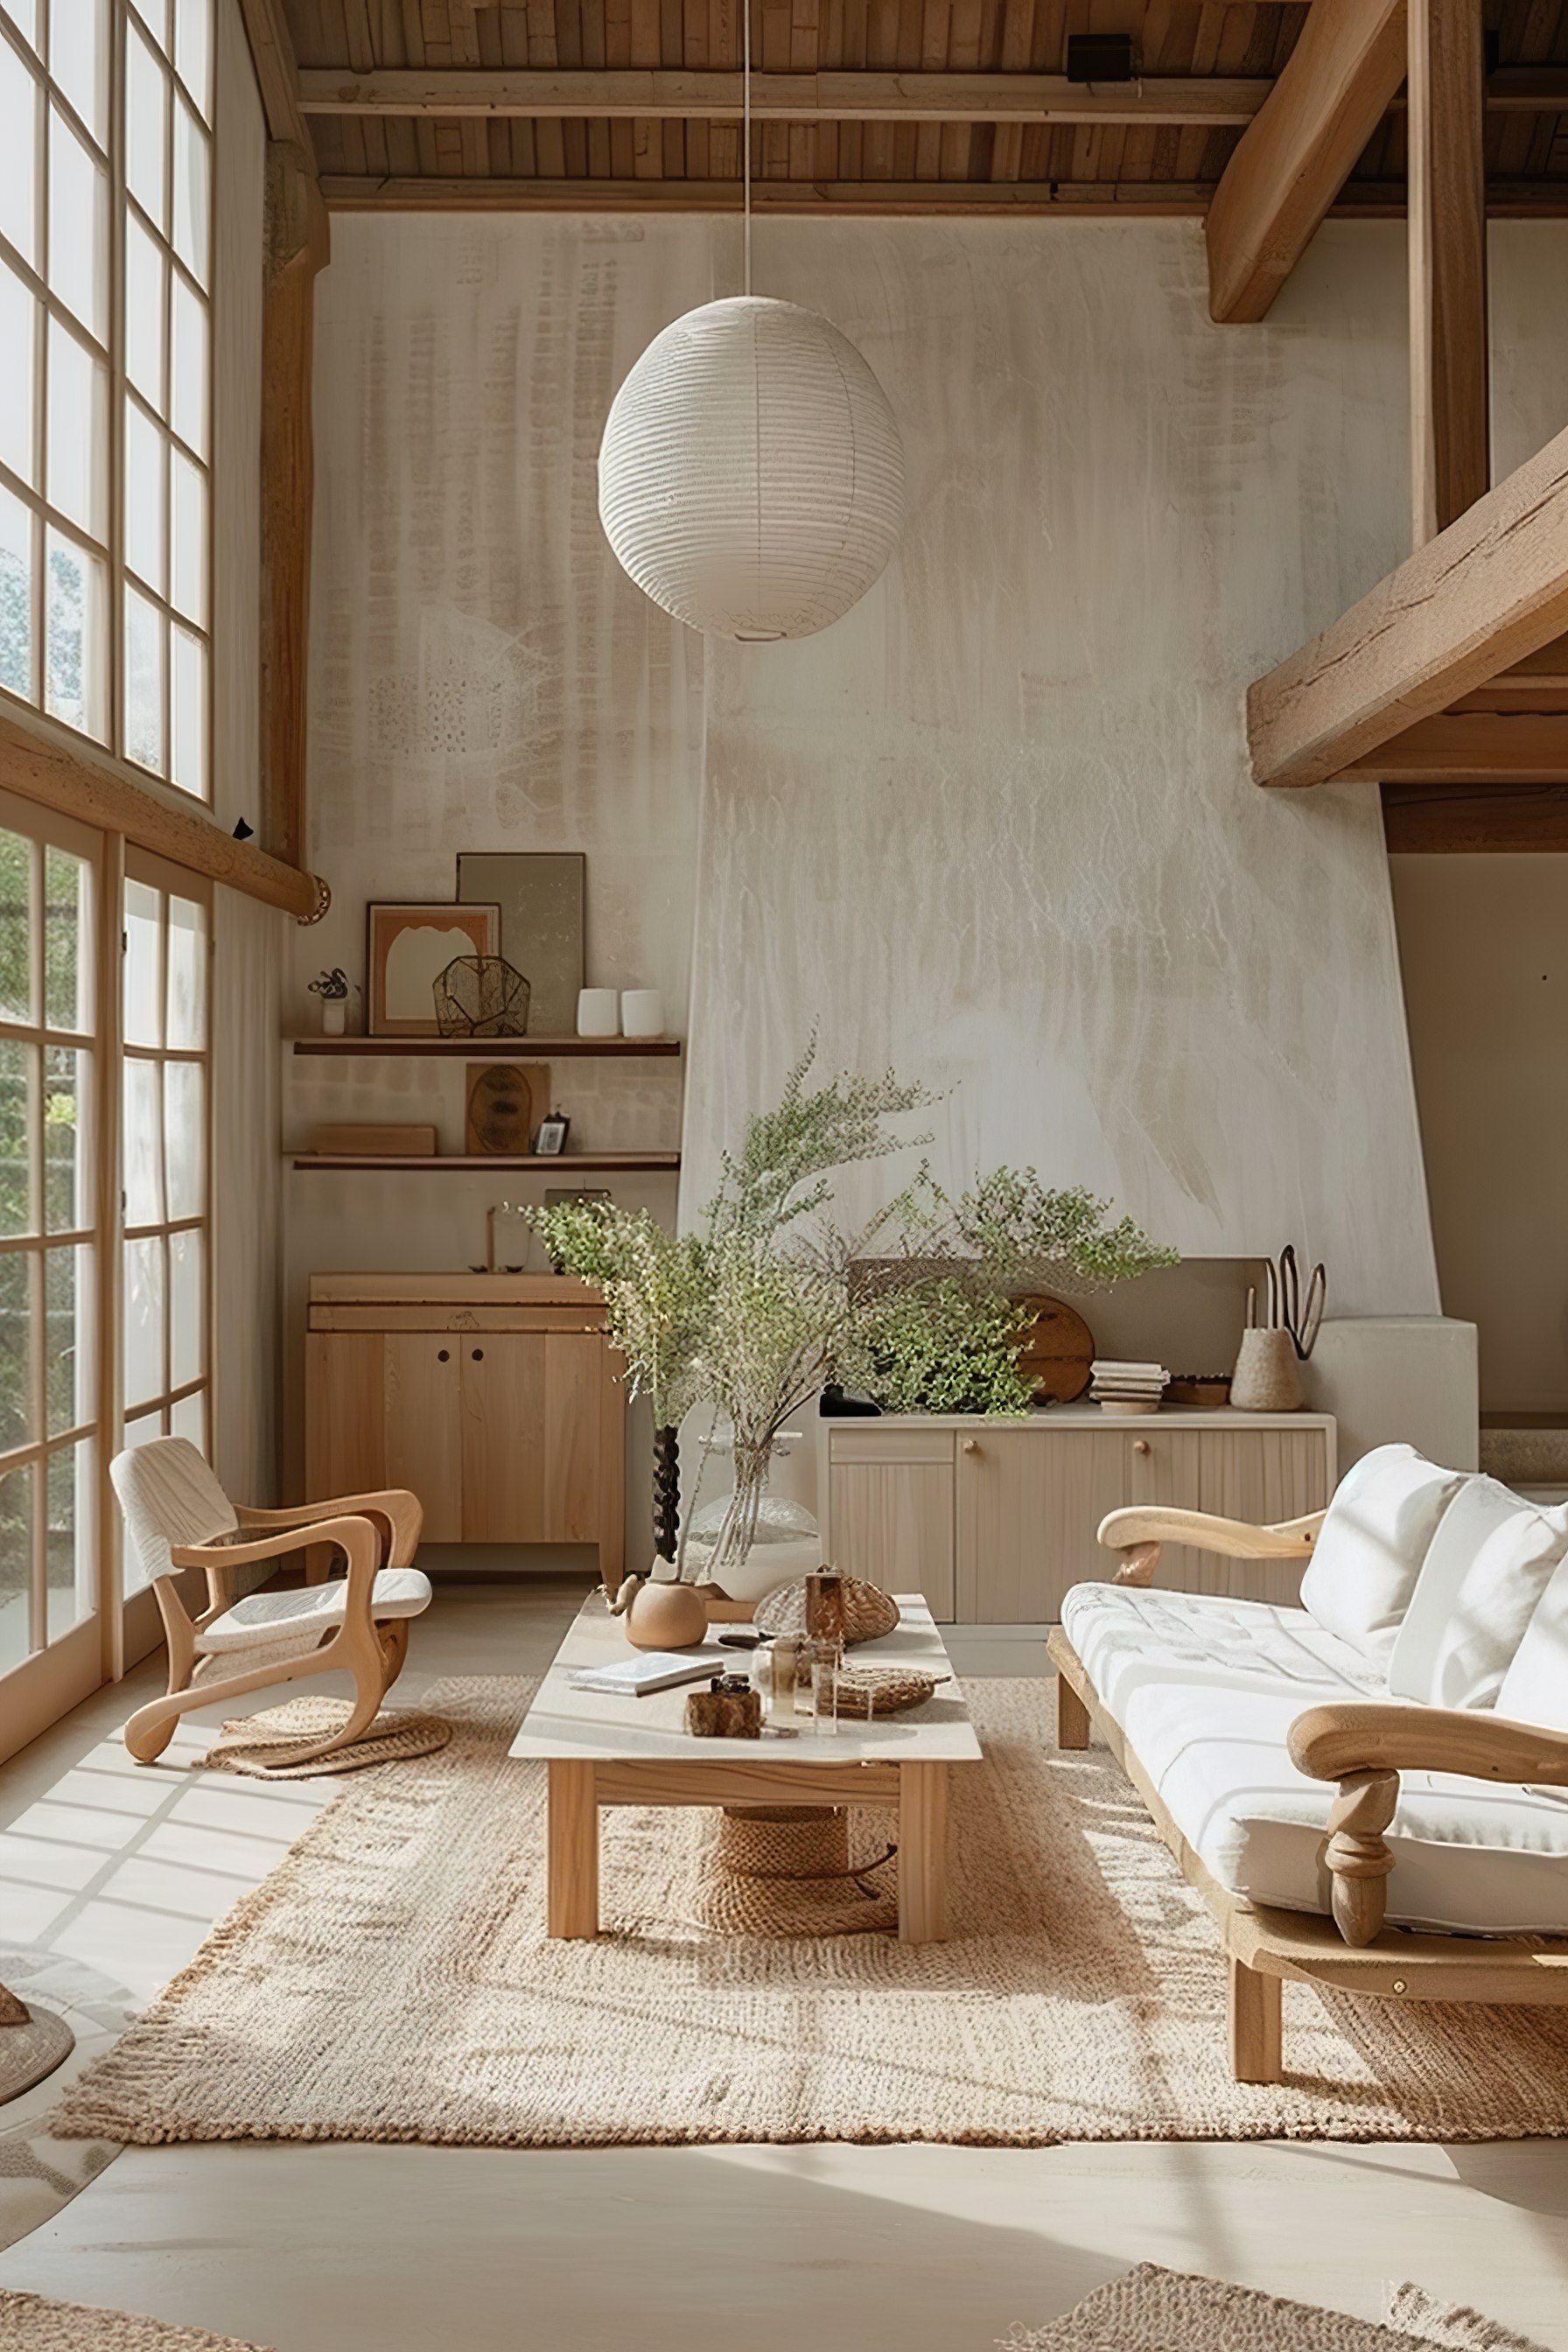 ALT: A cozy, sunlit room with wooden furniture, a large paper lantern, plush rugs, potted plants, and warm neutral tones.